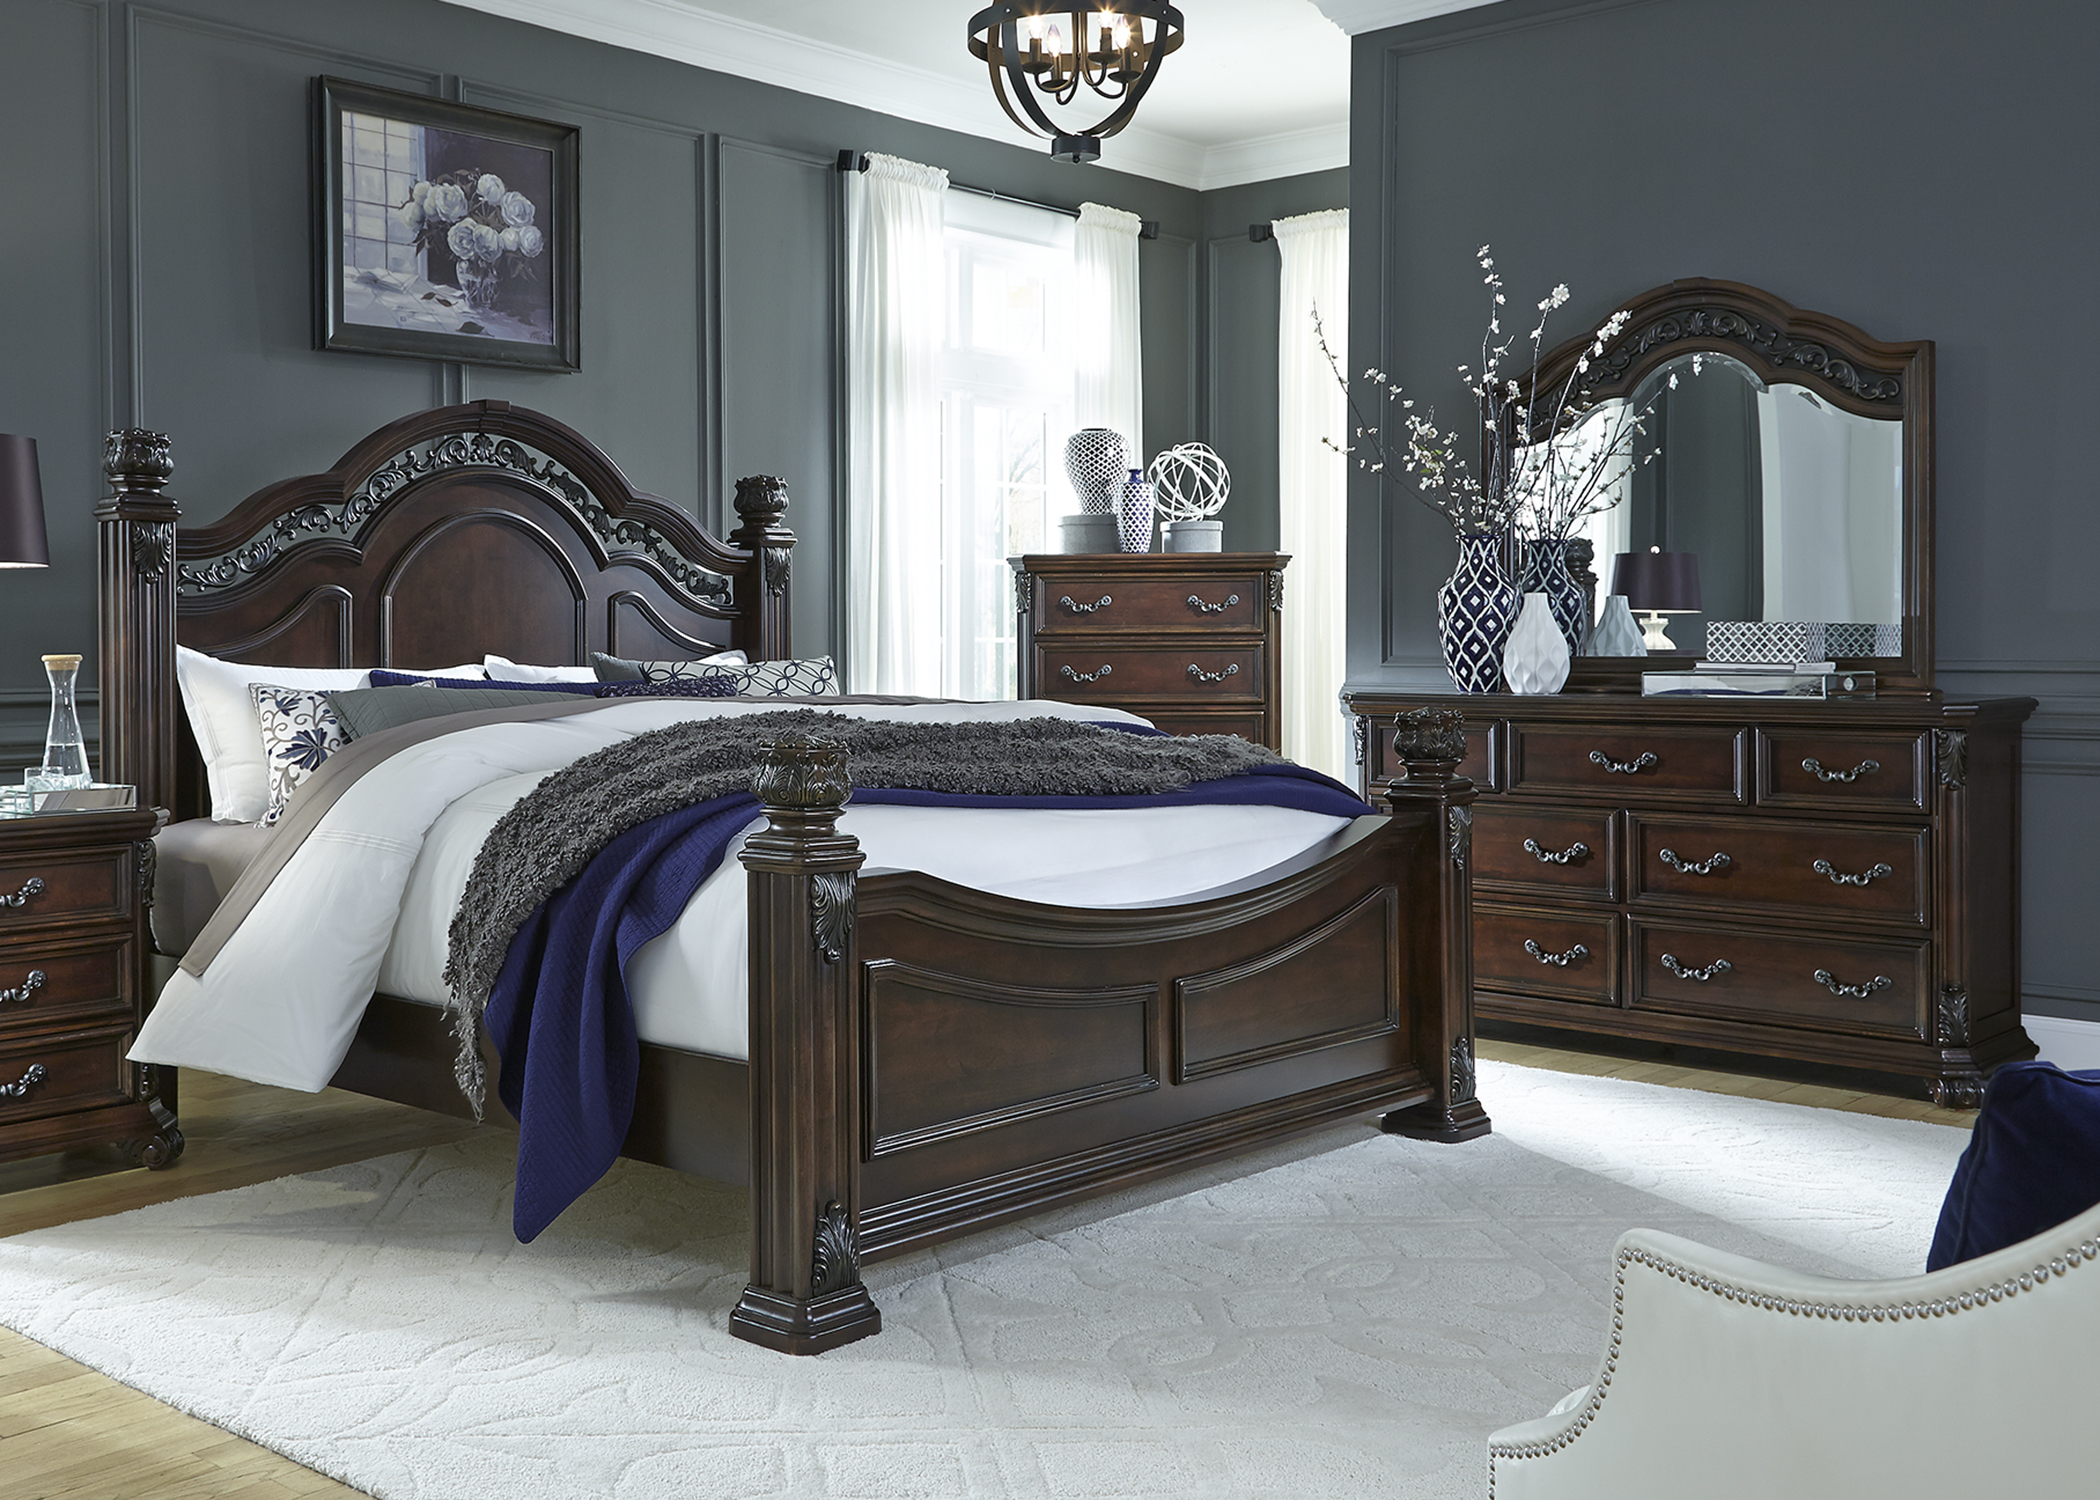 Liberty Furniture Messina Estates Bedroom King Poster Bed, Dresser, and Mirror Collection